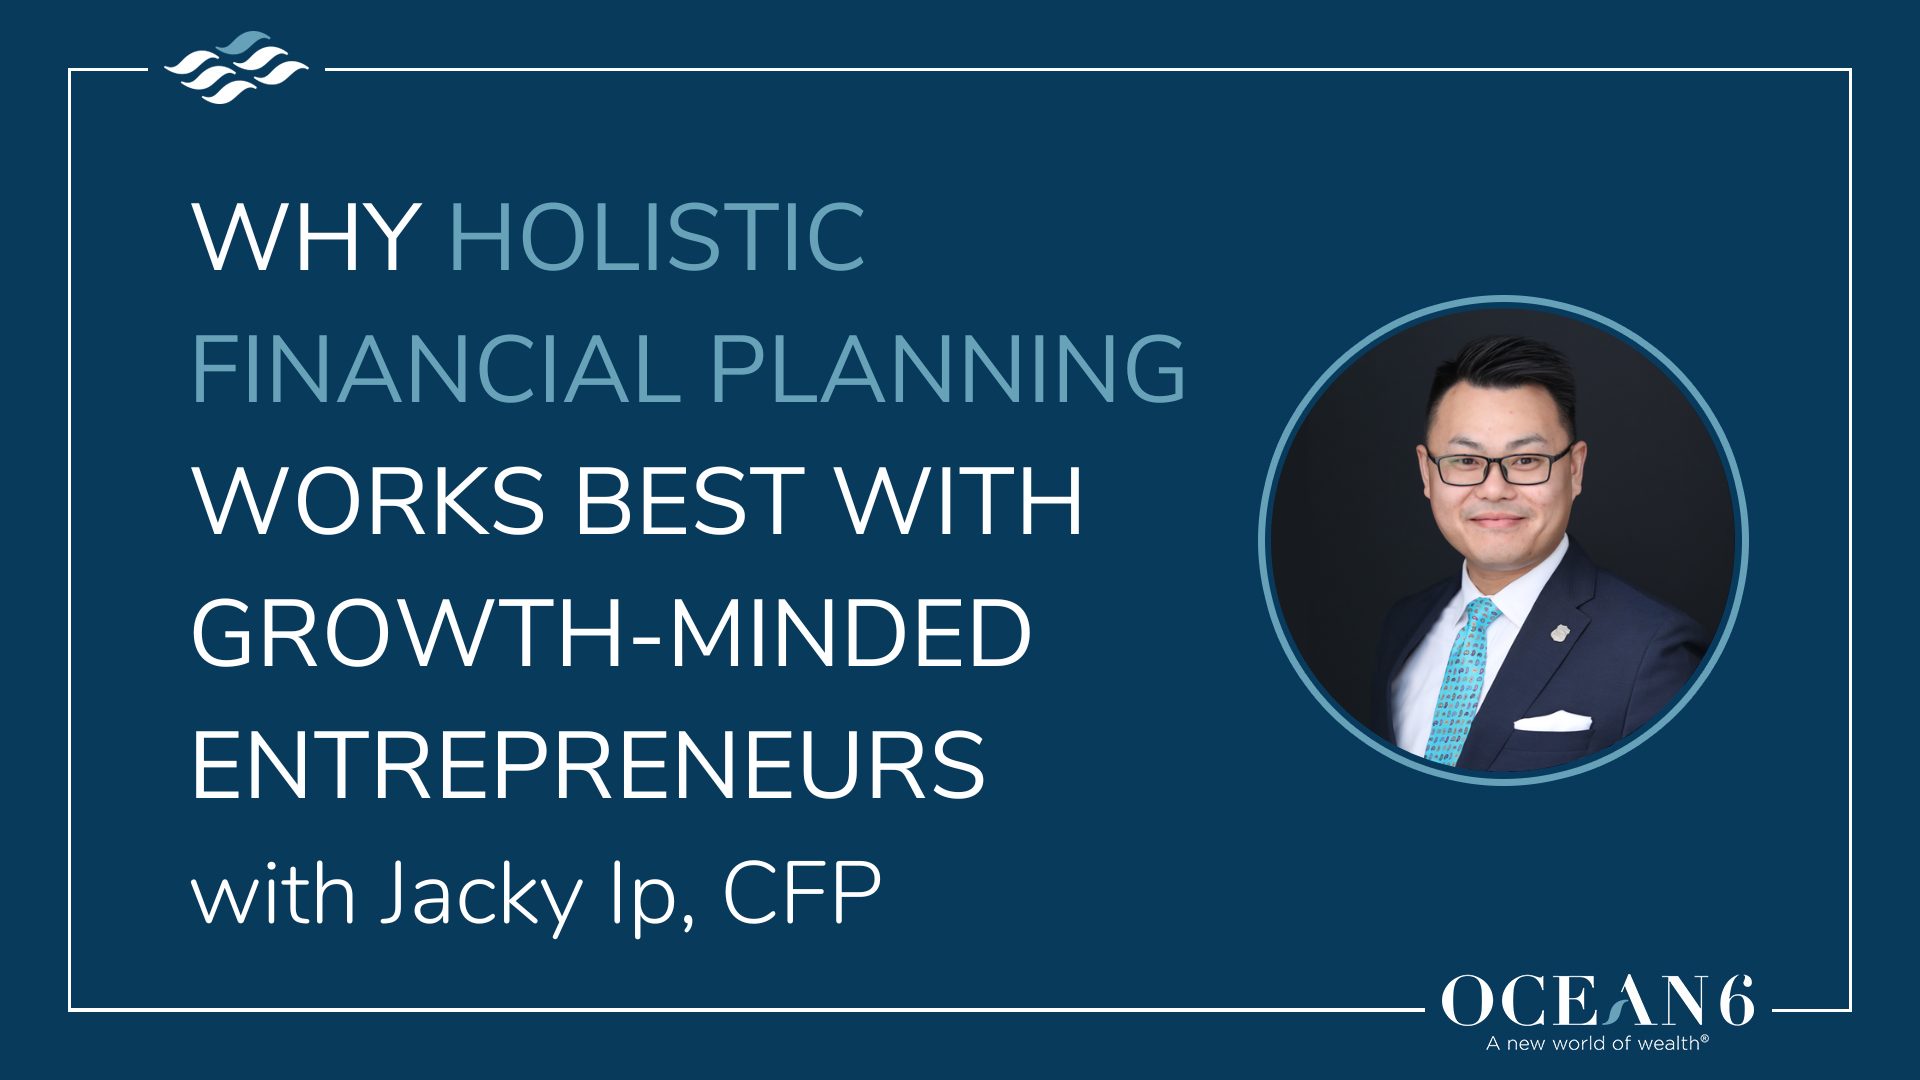 Blog thumbnail with advisor headshot - why holistic financial planning works best with growth-minded entrepreneurs